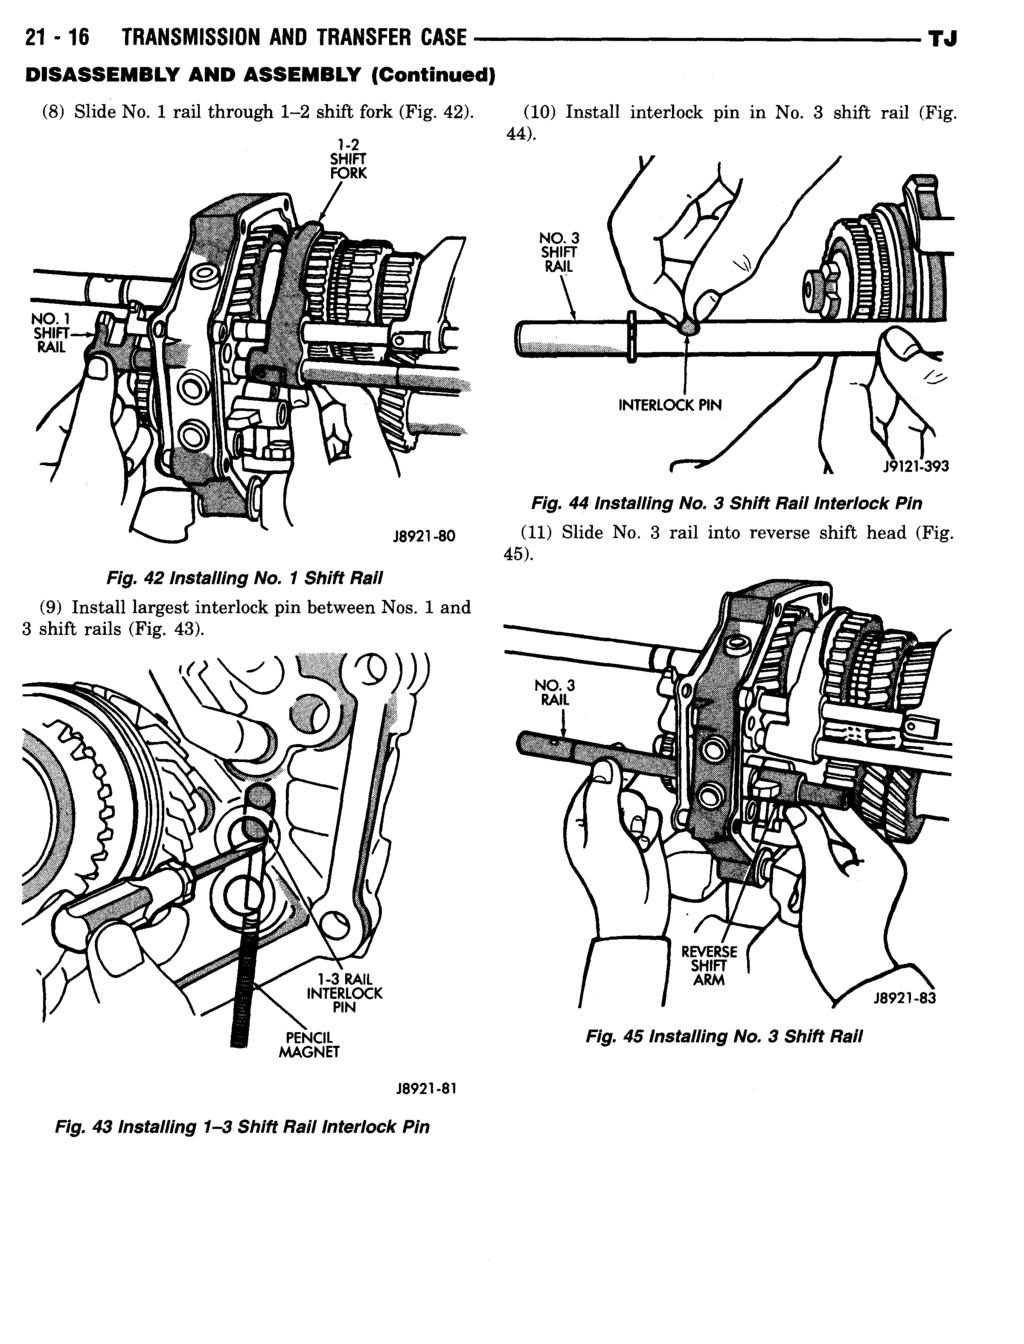 21-16 TRANSMISSION AND TRANSFER CASE (8) Slide No. 1 rail through 1-2 shift fork (Fig. 42). (10) Install interlock pin in No. 3 shift rail ( 1-2 SHIFT FORK 44). 42 Installing No.